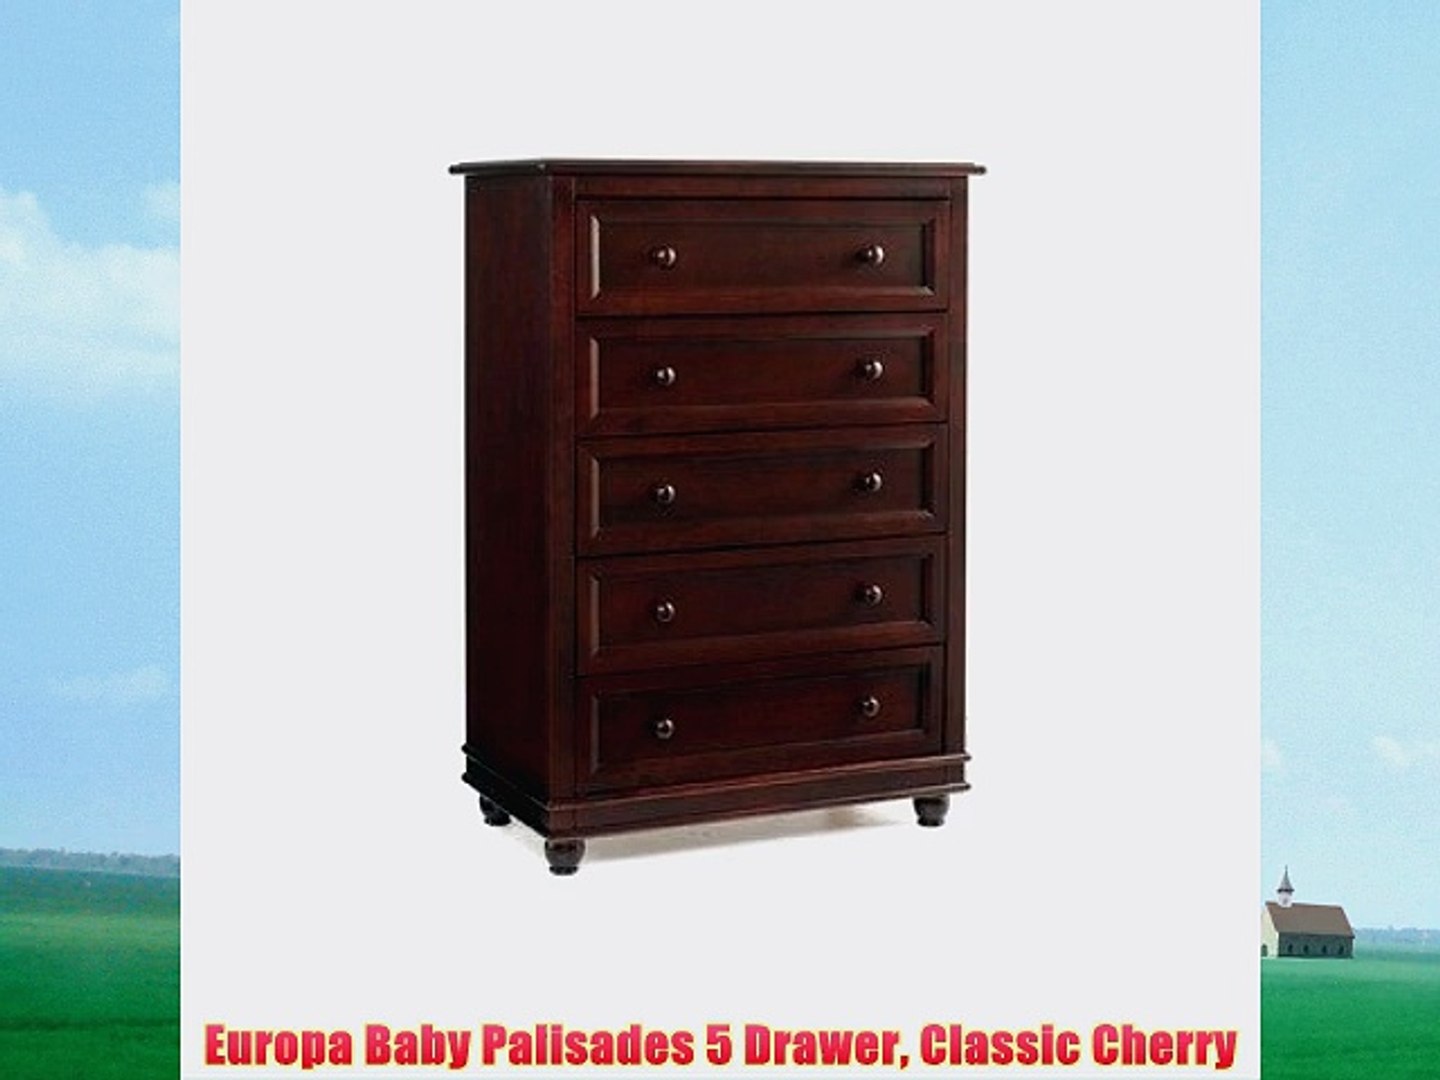 Europa Baby Palisades 5 Drawer Classic Cherry Video Dailymotion